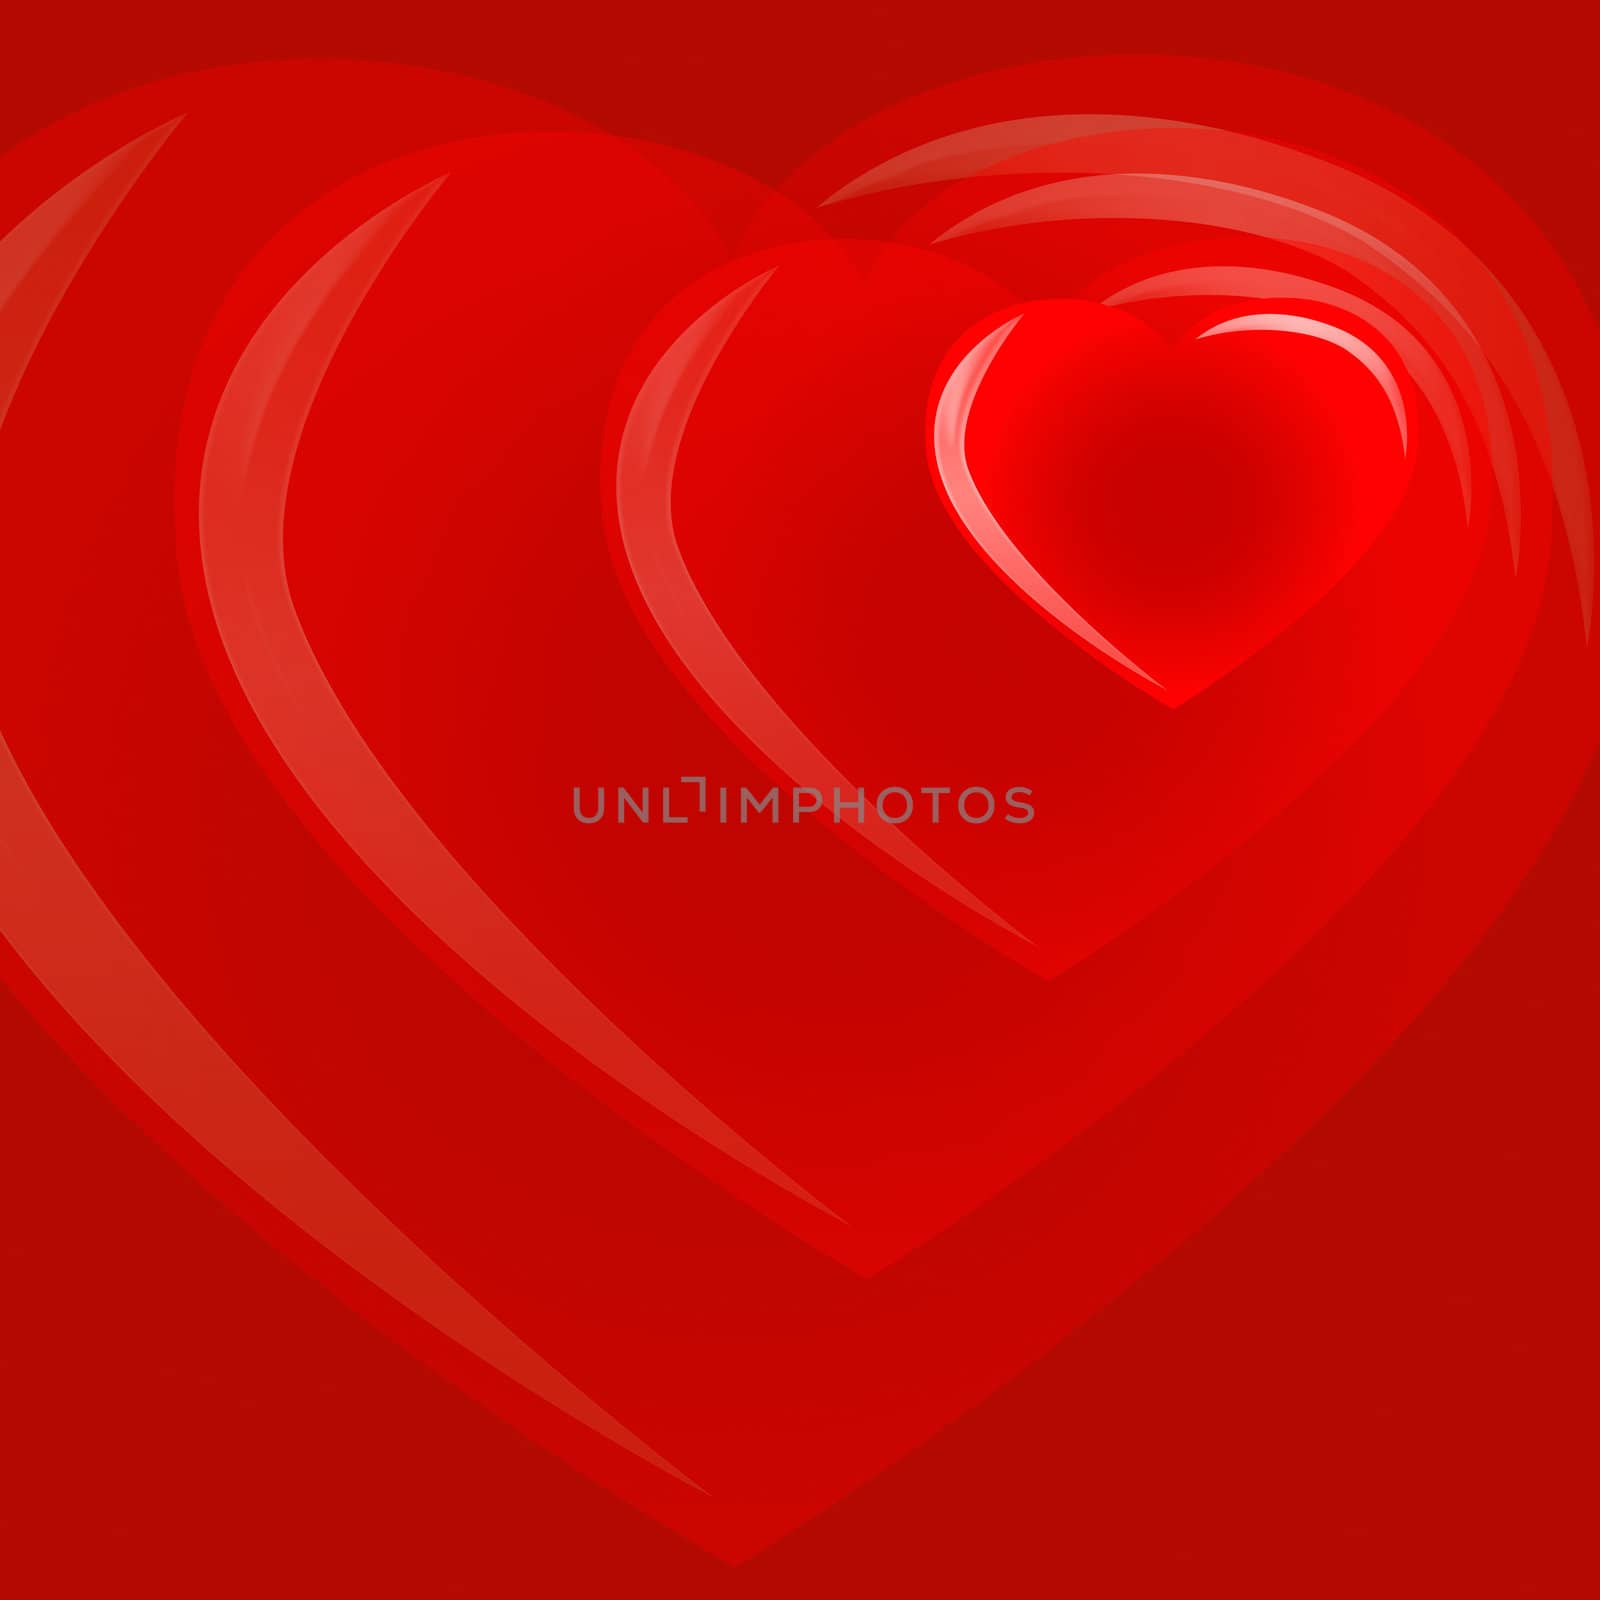 St. Valentine 's Day red background with heart and place for text